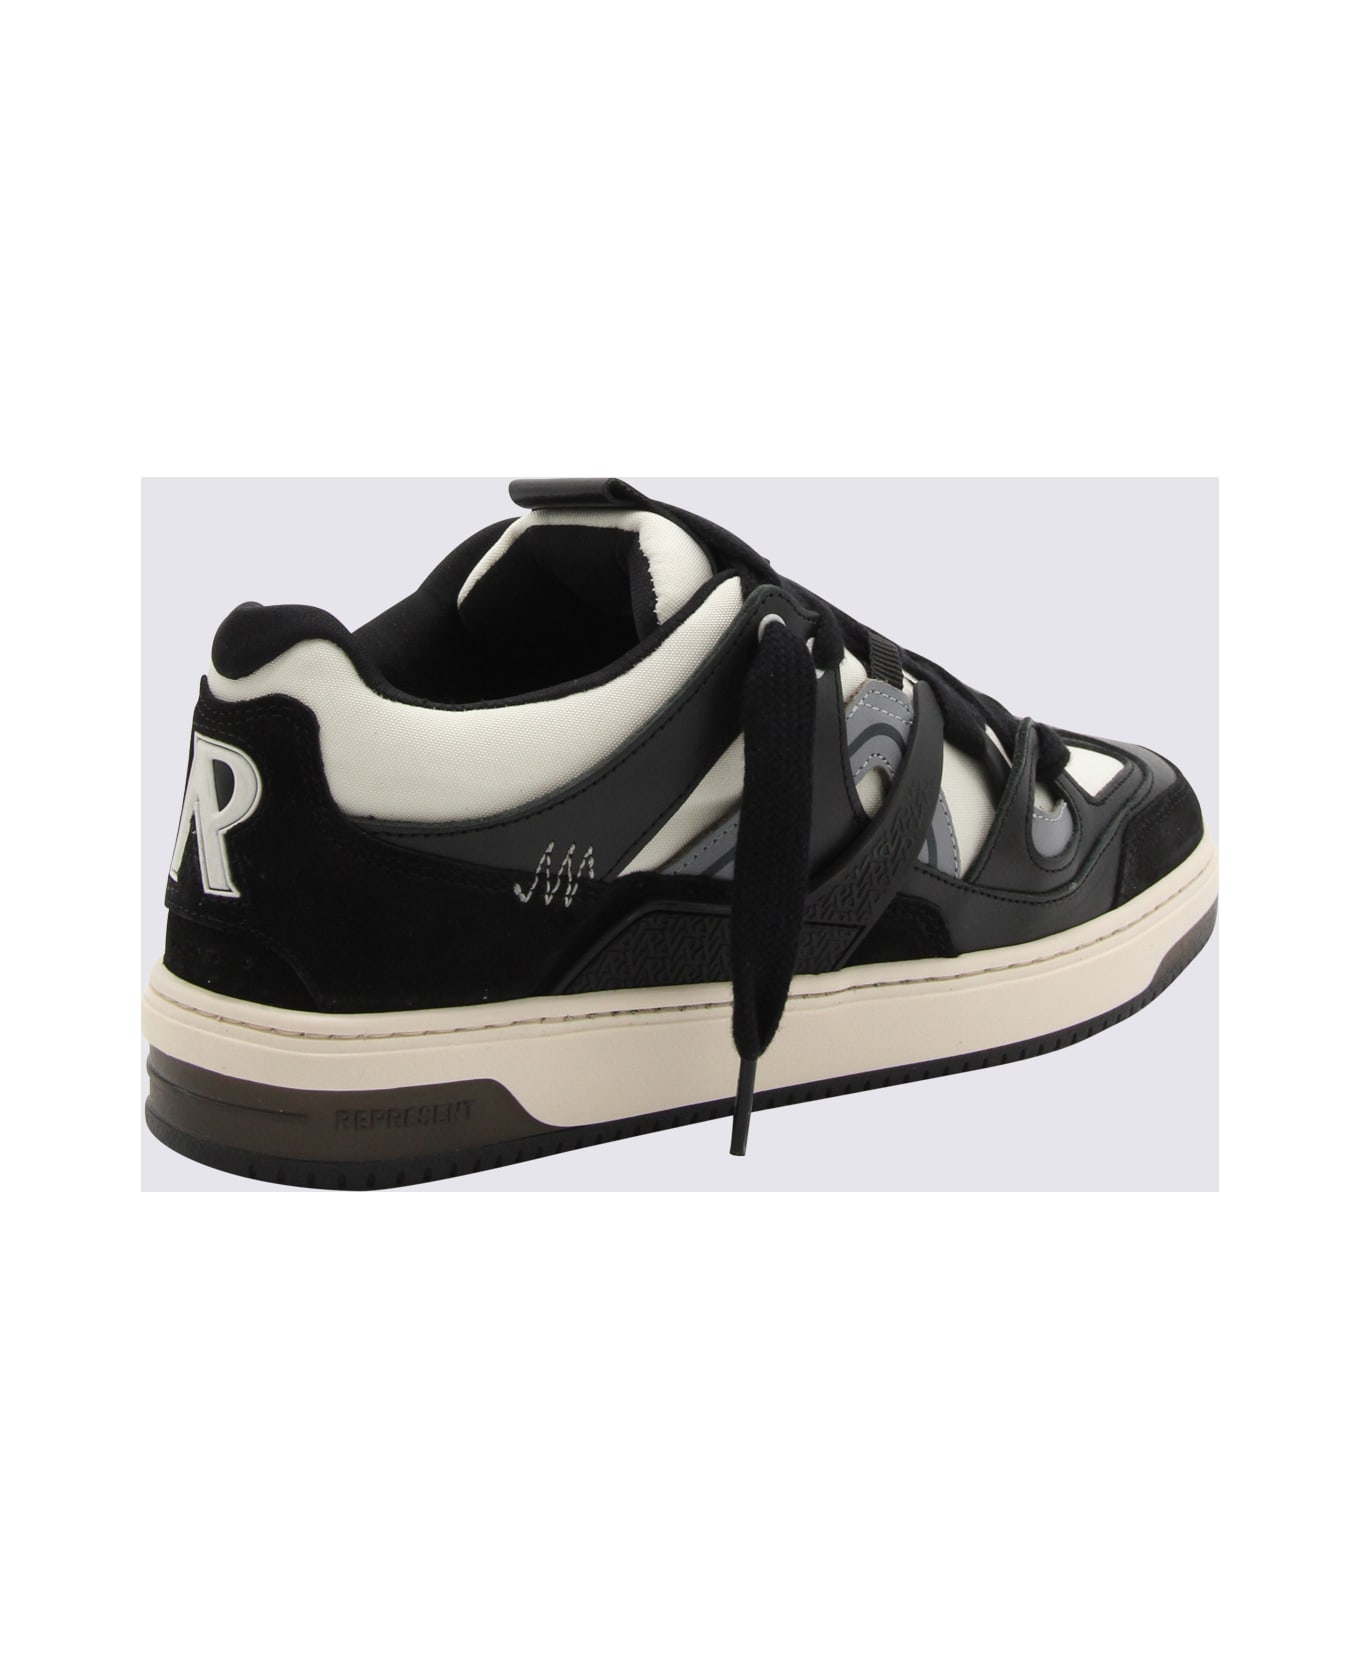 REPRESENT Black And White Leather Sneakers - Black